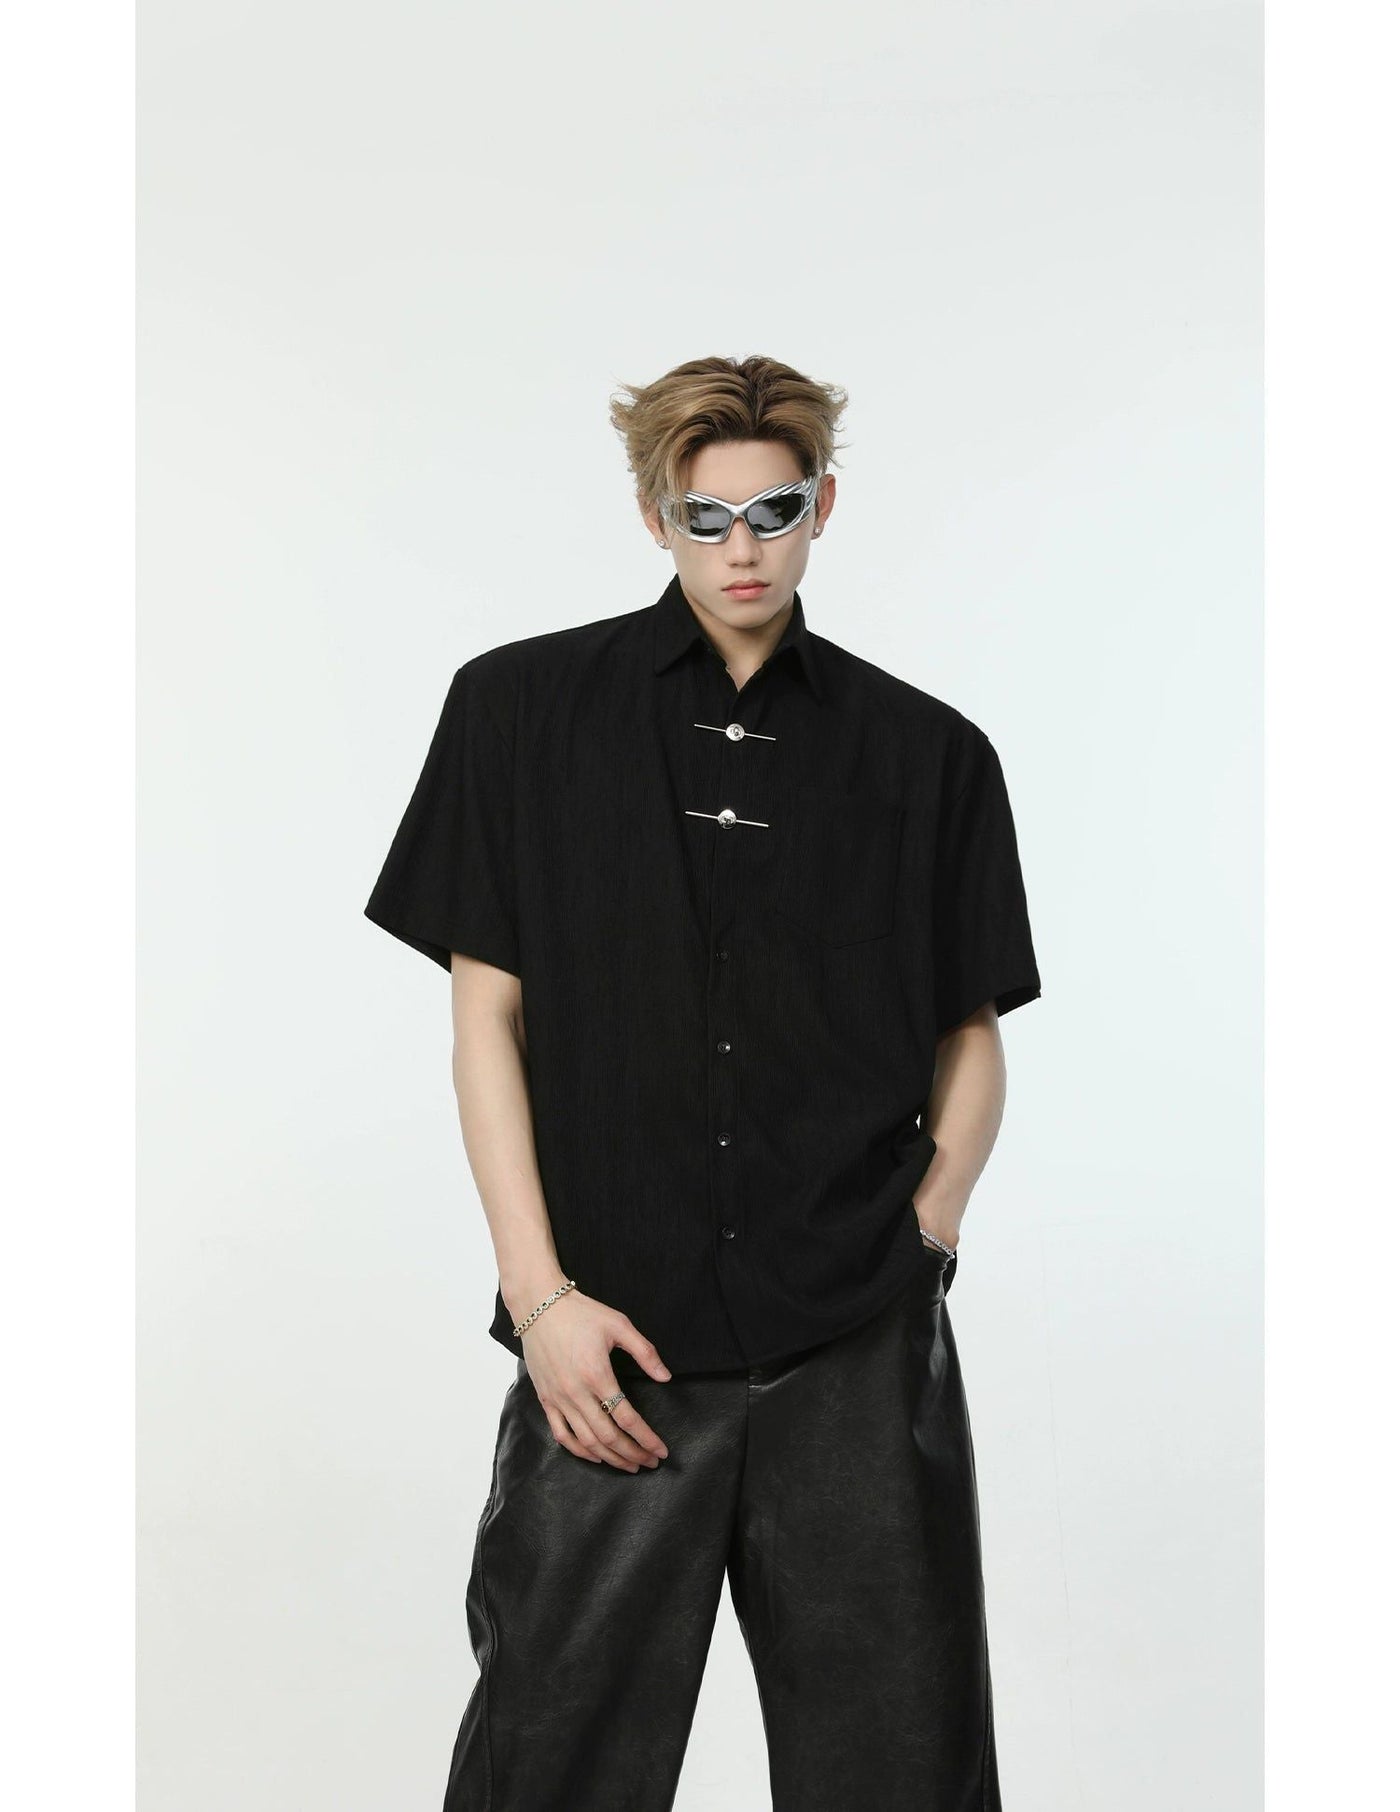 Asian Style Link Shirt Korean Street Fashion Shirt By Turn Tide Shop Online at OH Vault